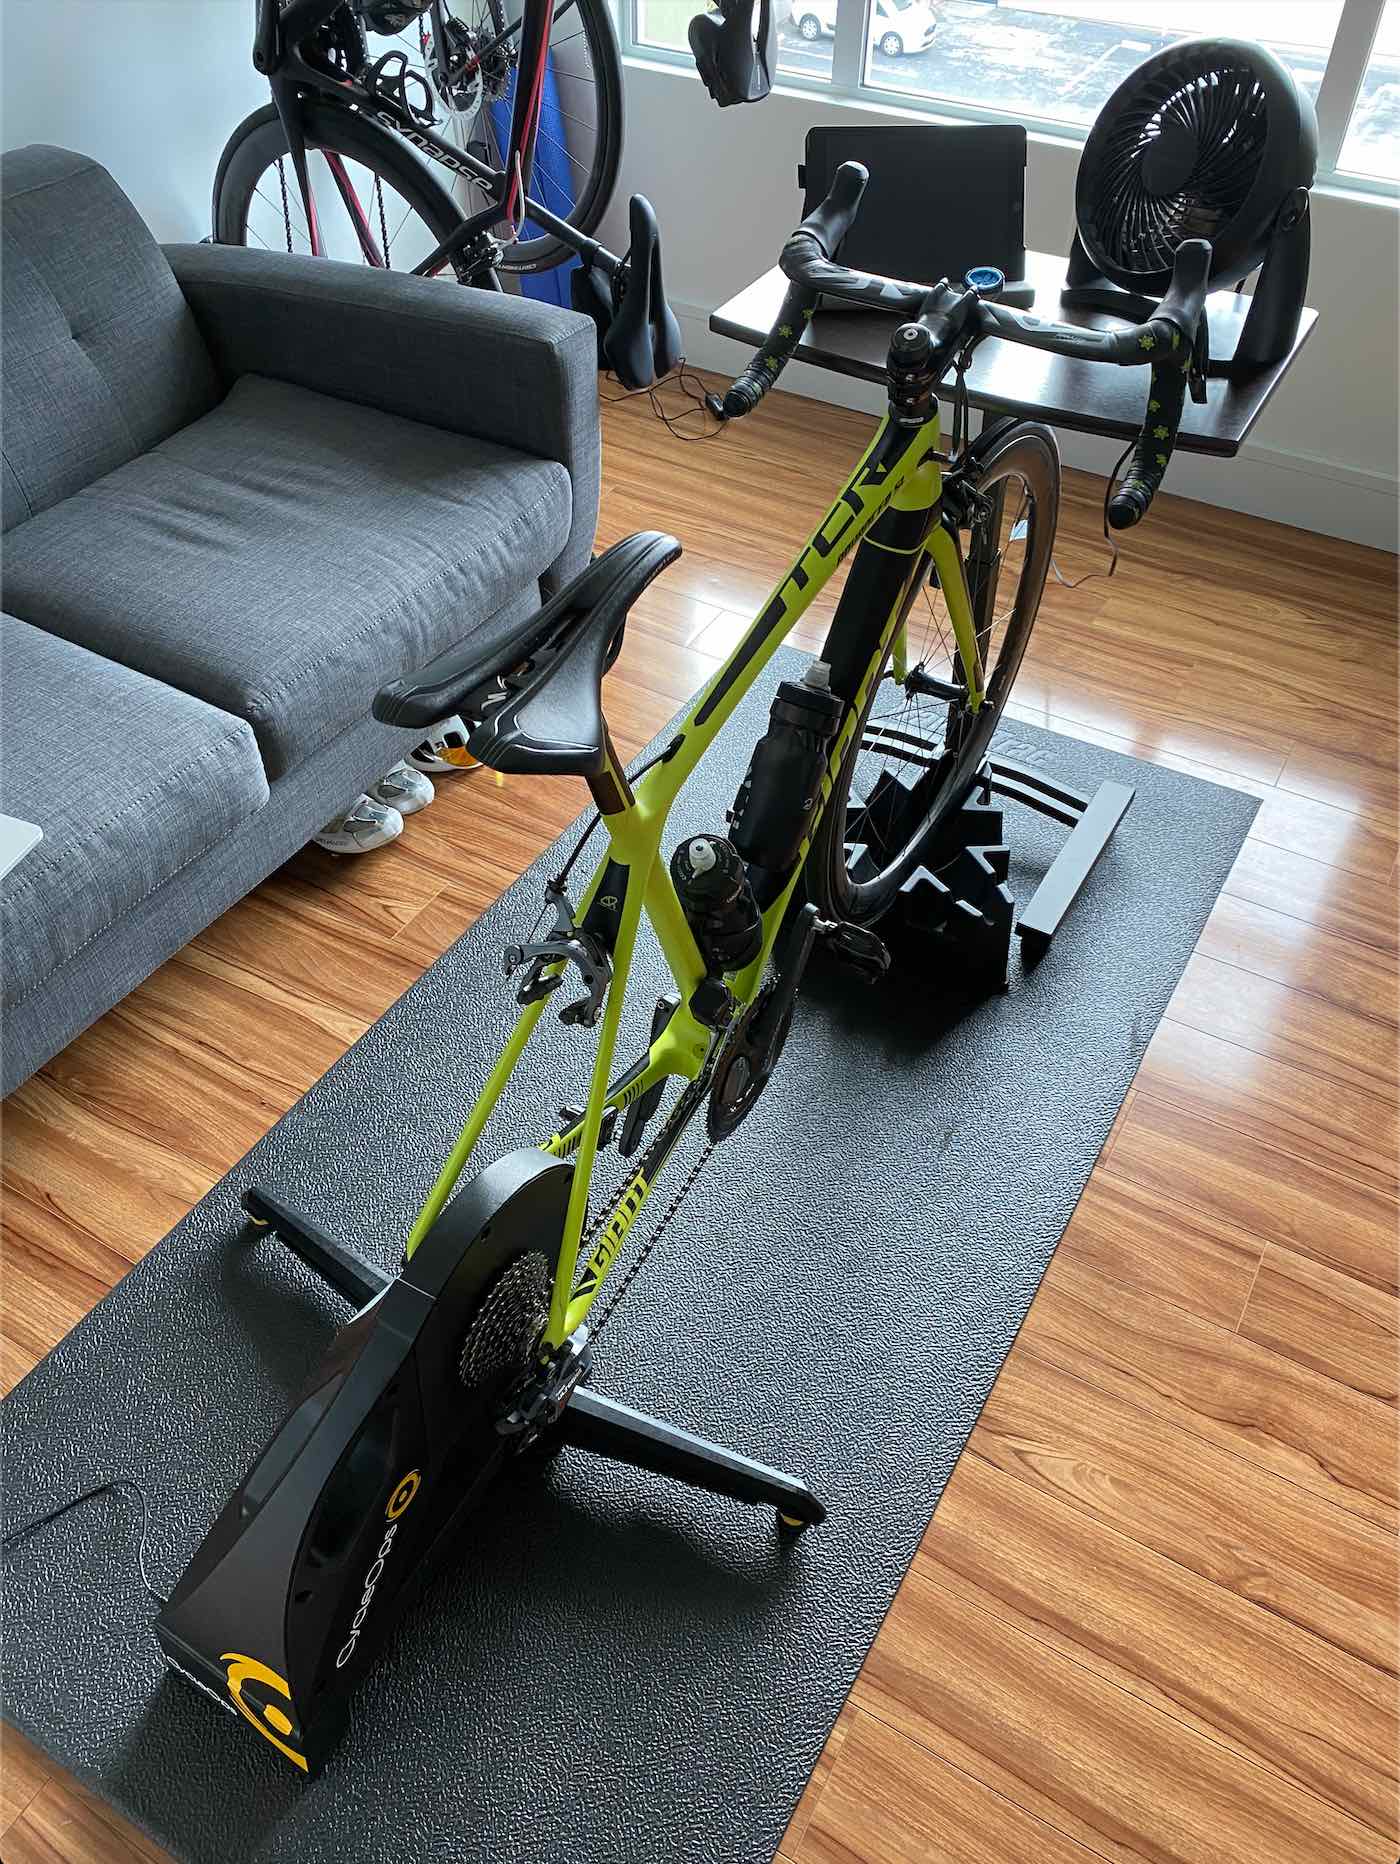 A Giant TCR bicycle mounted into a direct drive smart trainer indoors overlooking a window with a small desk in front